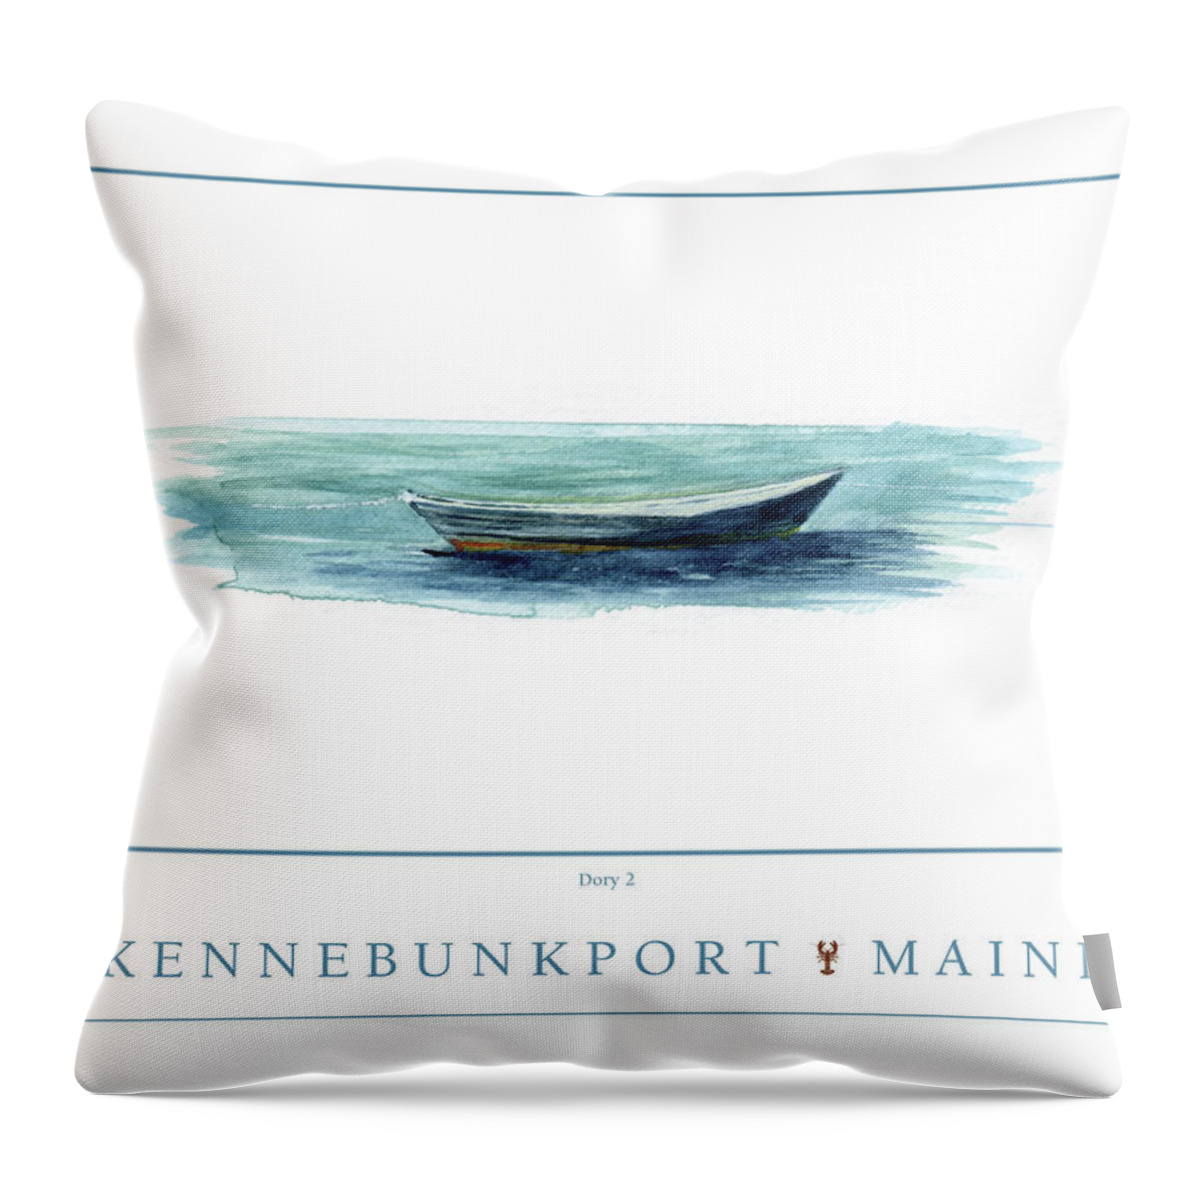 Kennebunkport Throw Pillow featuring the digital art Kennebunkport Dory 2 by Paul Gaj